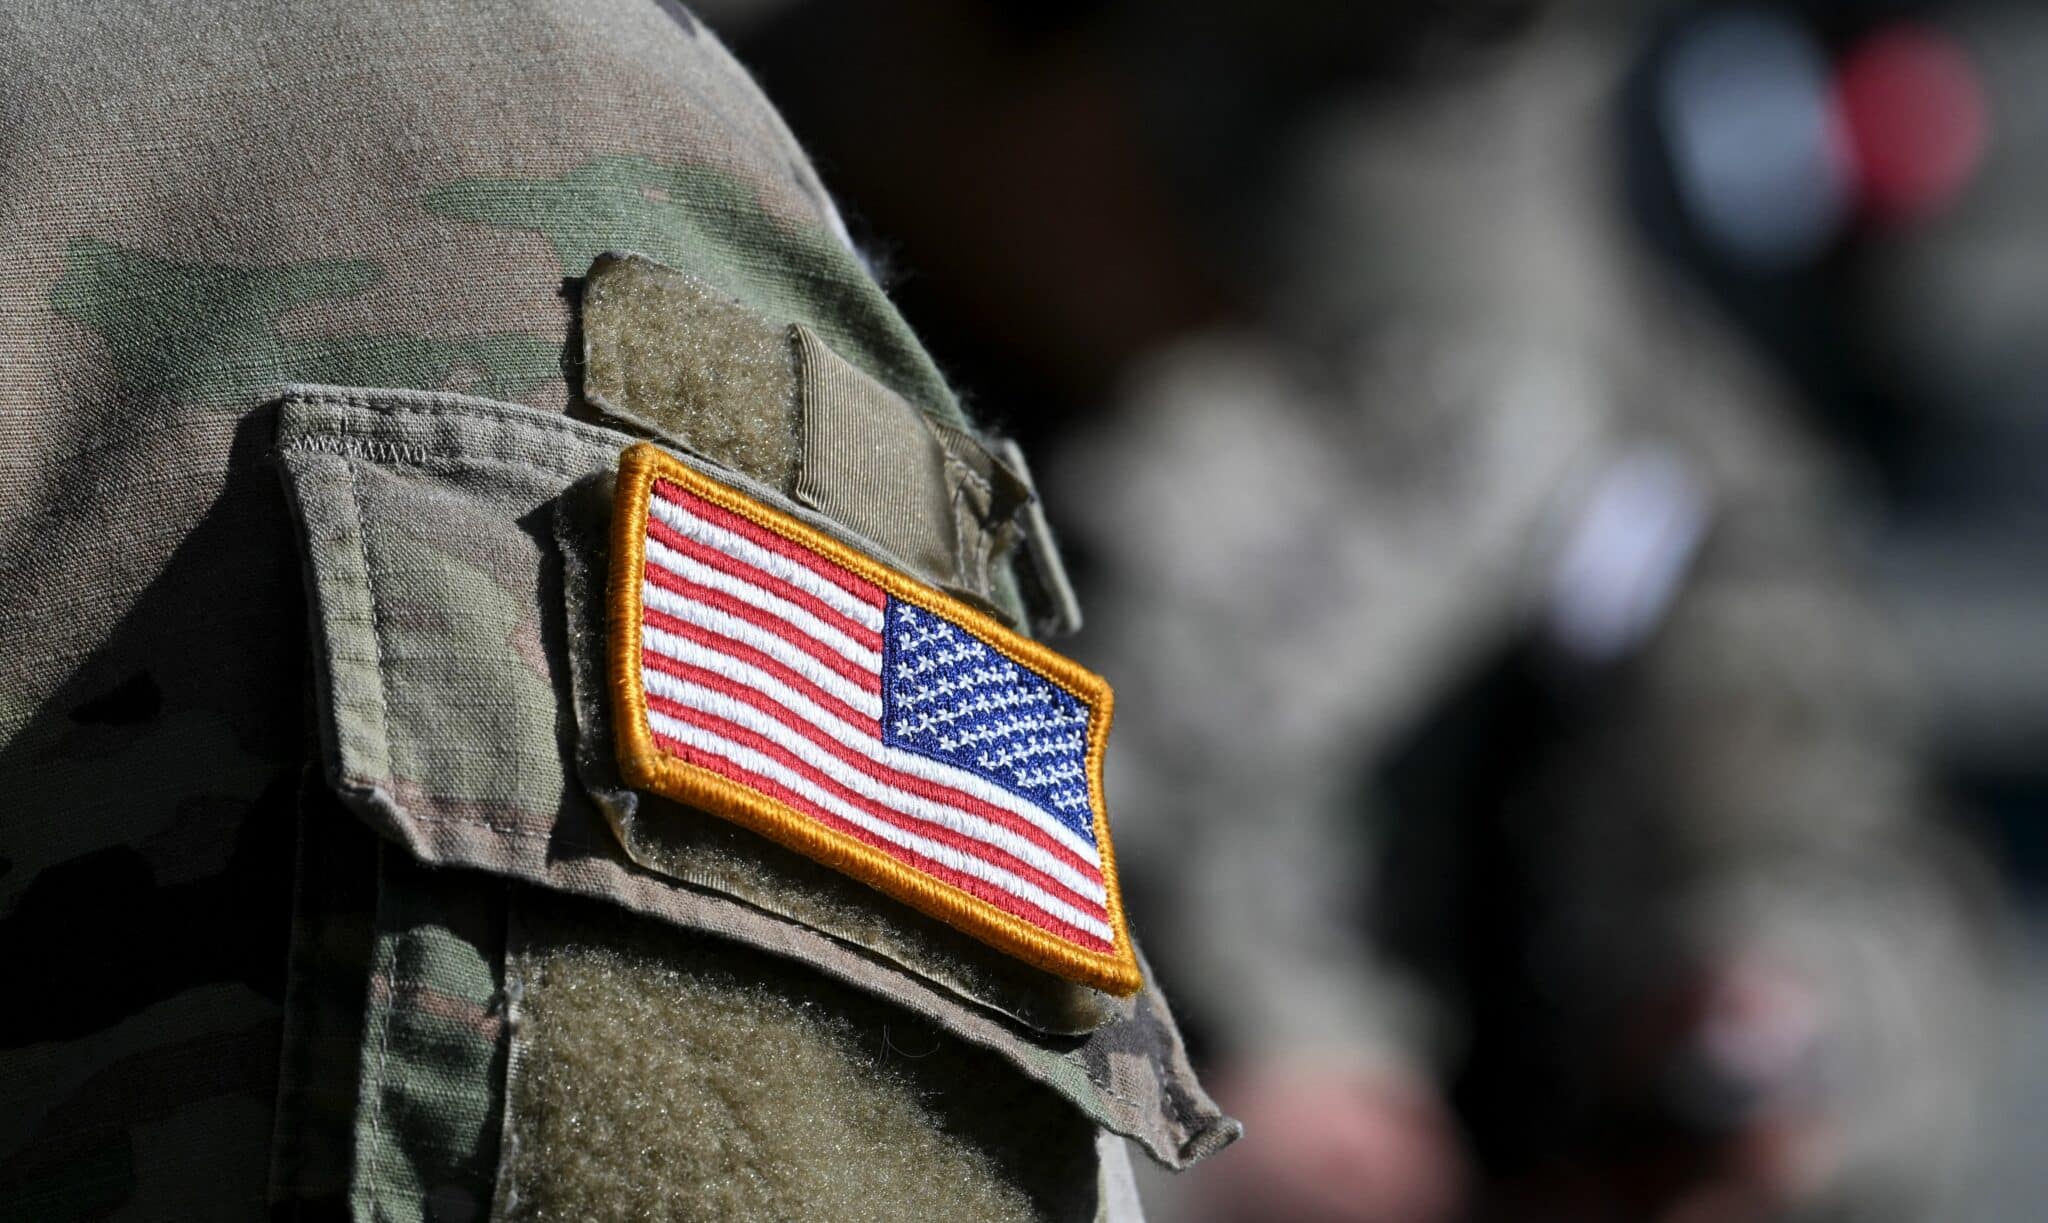 A US flag is pictured on a soldier's uniform at the United States Army military training base in Grafenwoehr, southern Germany, on March 11, 2022. (Photo by Christof STACHE / AFP) (Photo by CHRISTOF STACHE/AFP via Getty Images)